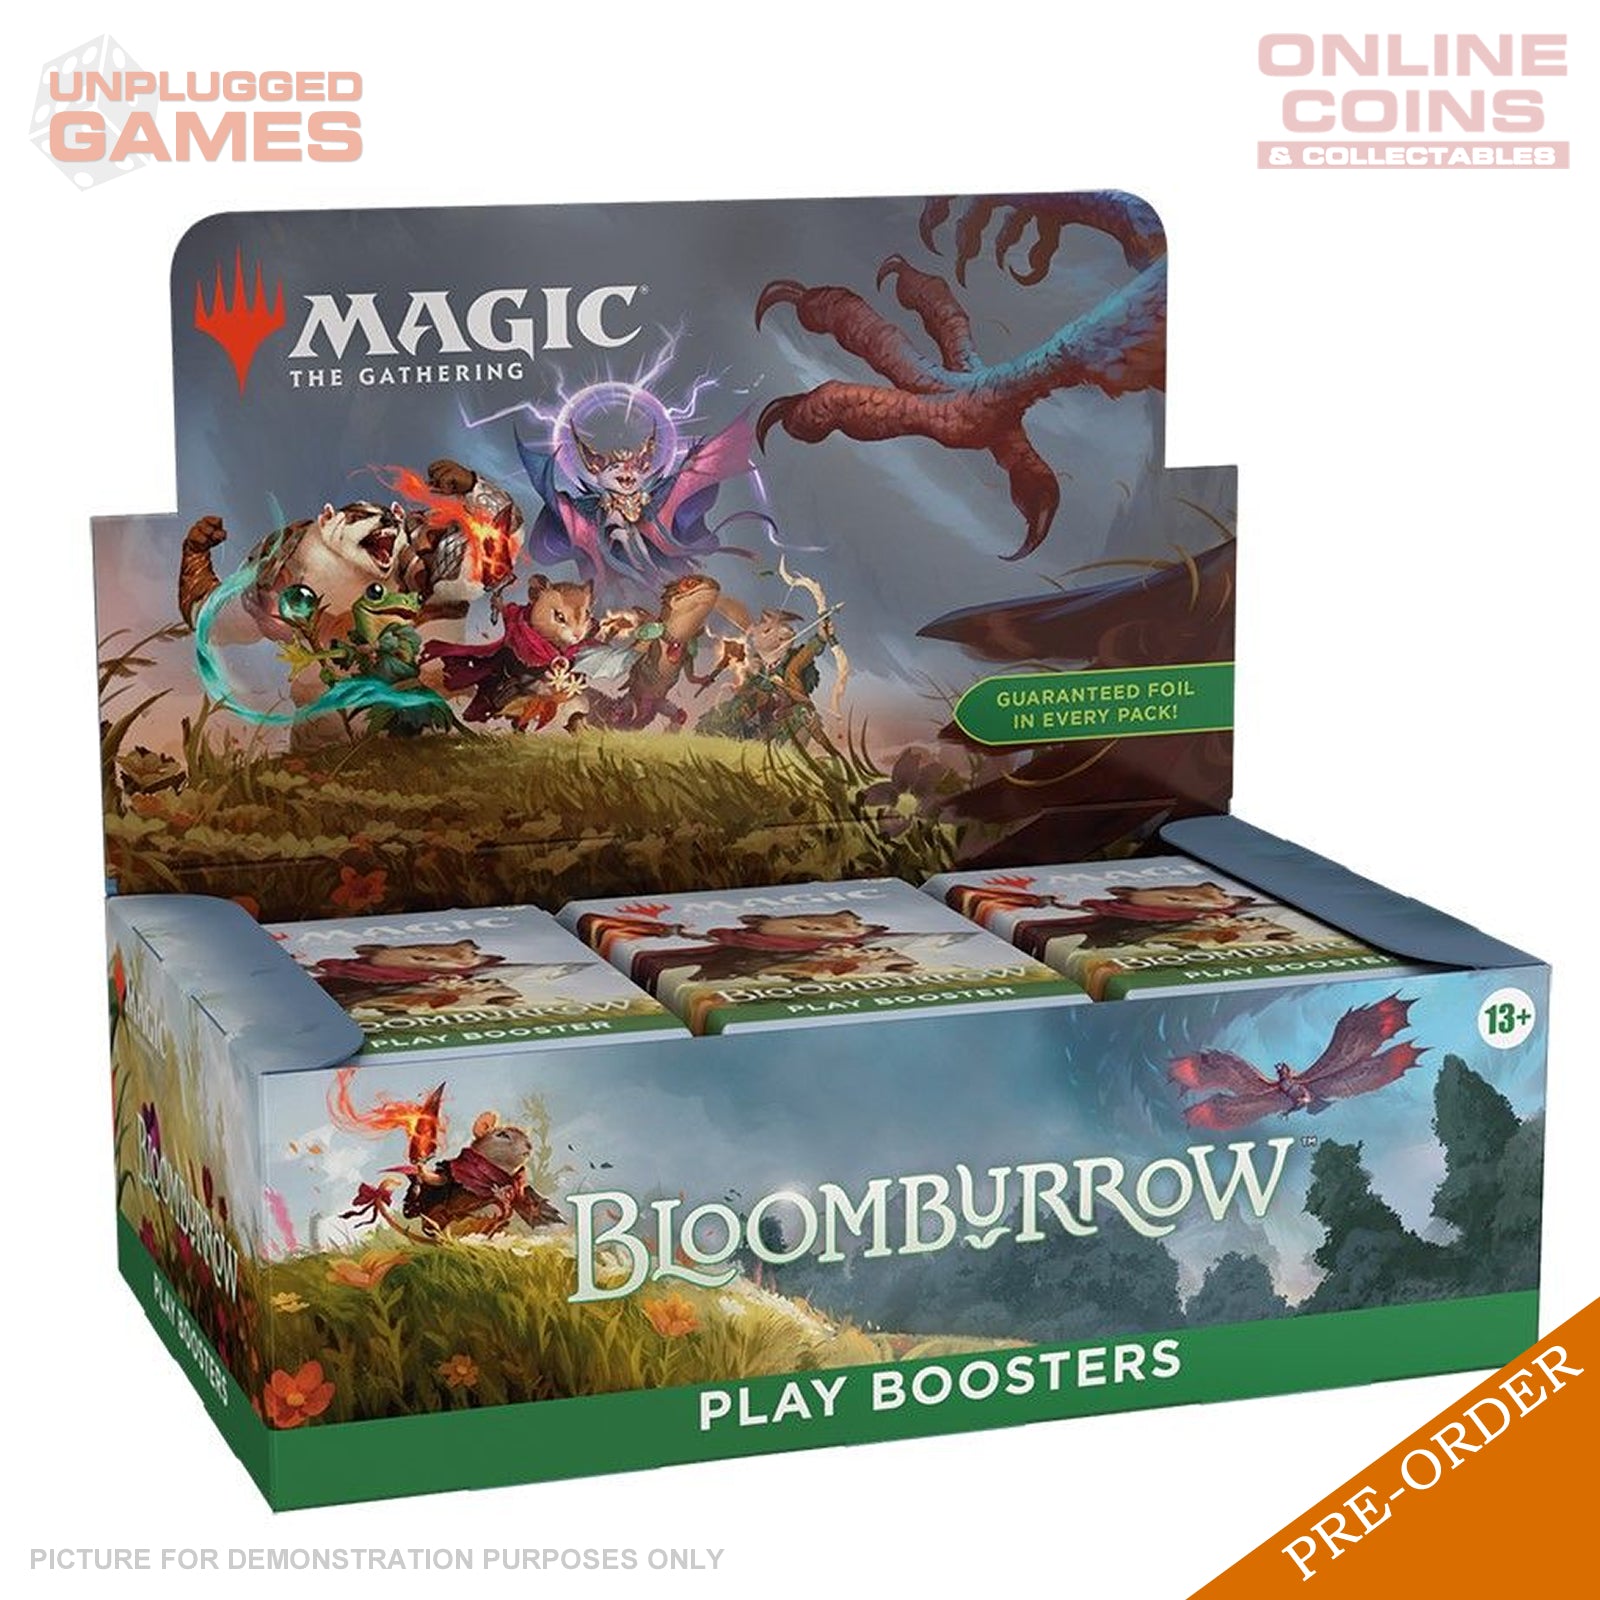 Magic the Gathering - Bloomburrow - Play Booster Box - PRE-ORDER